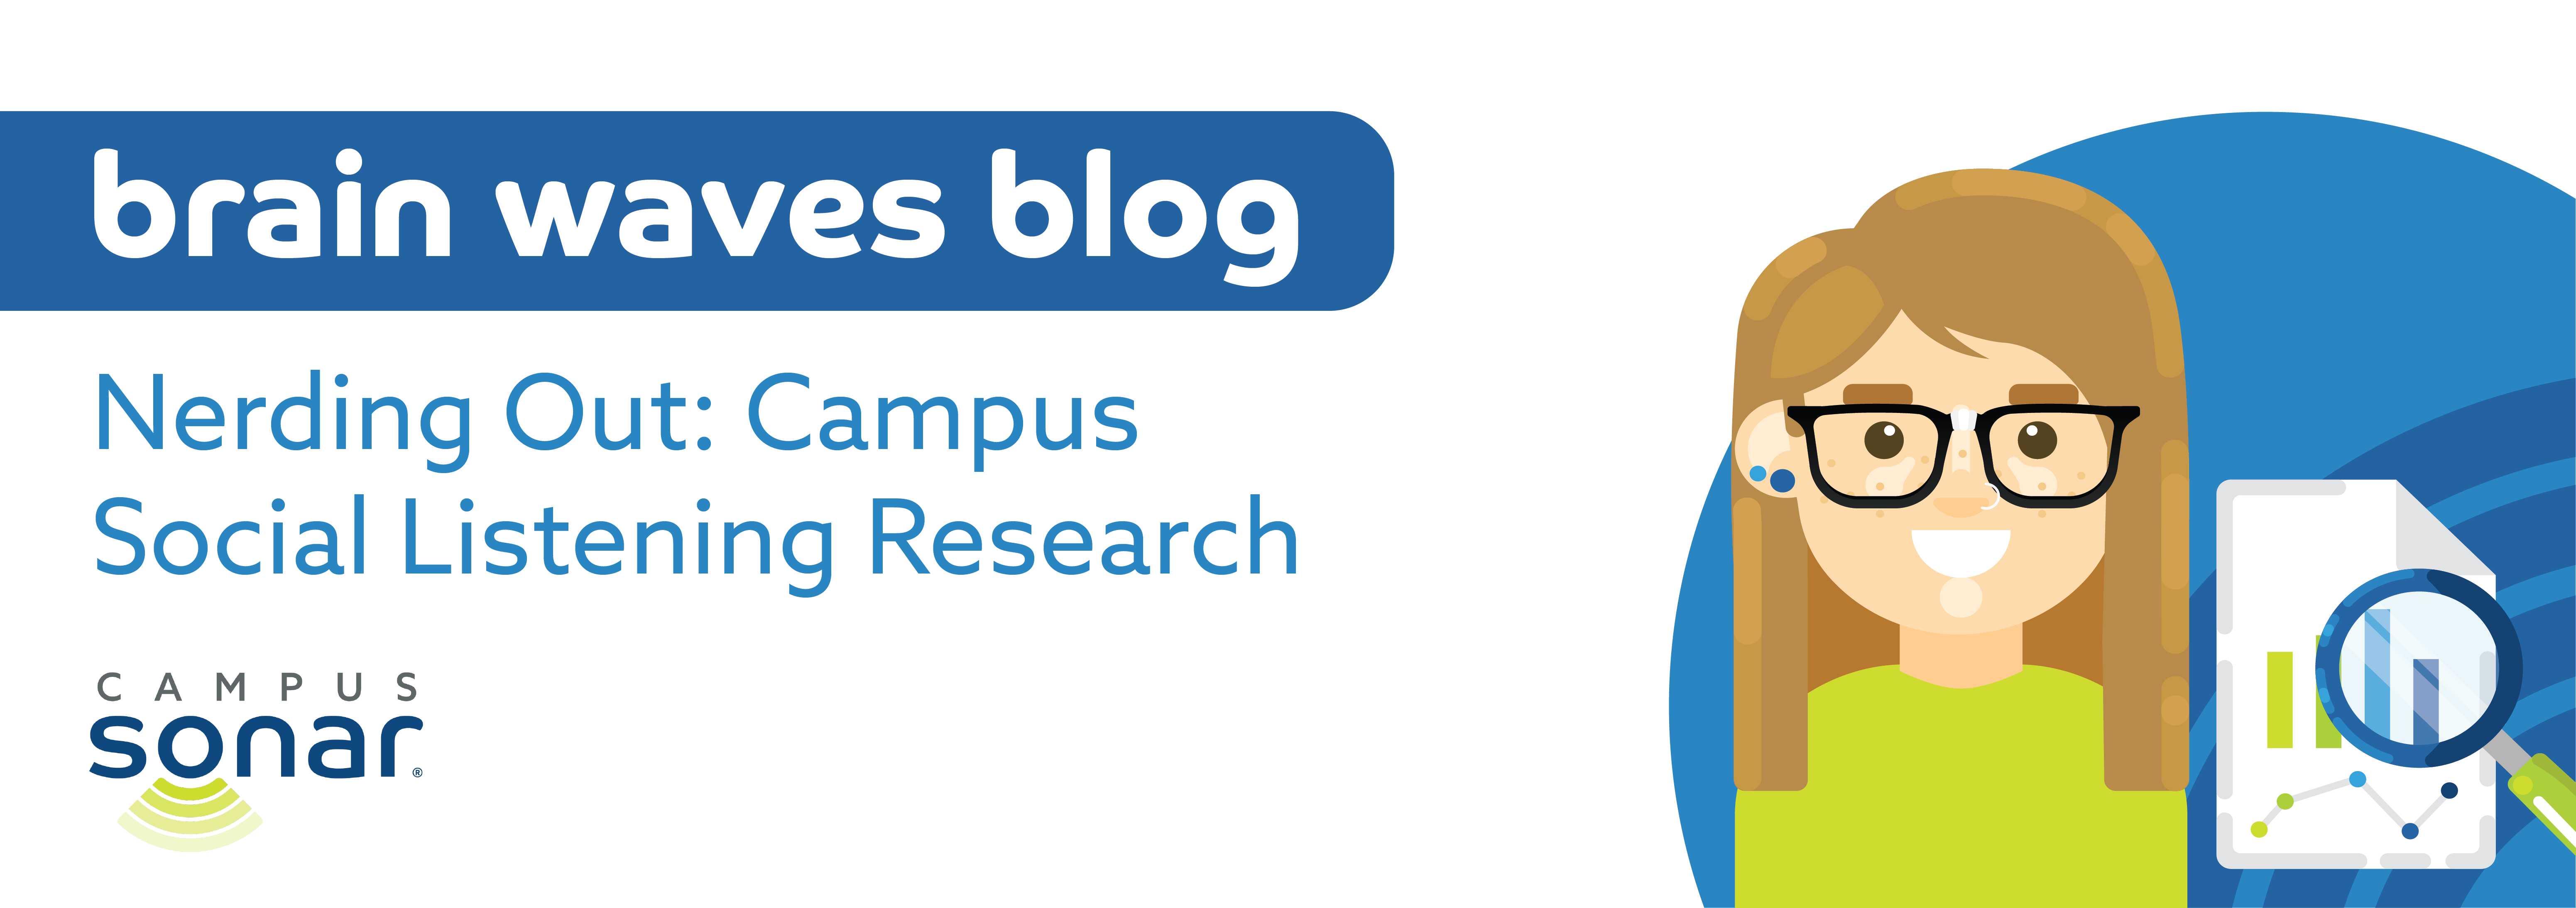 Brain Waves Blog: Nerding Out: Campus Social Listening Research